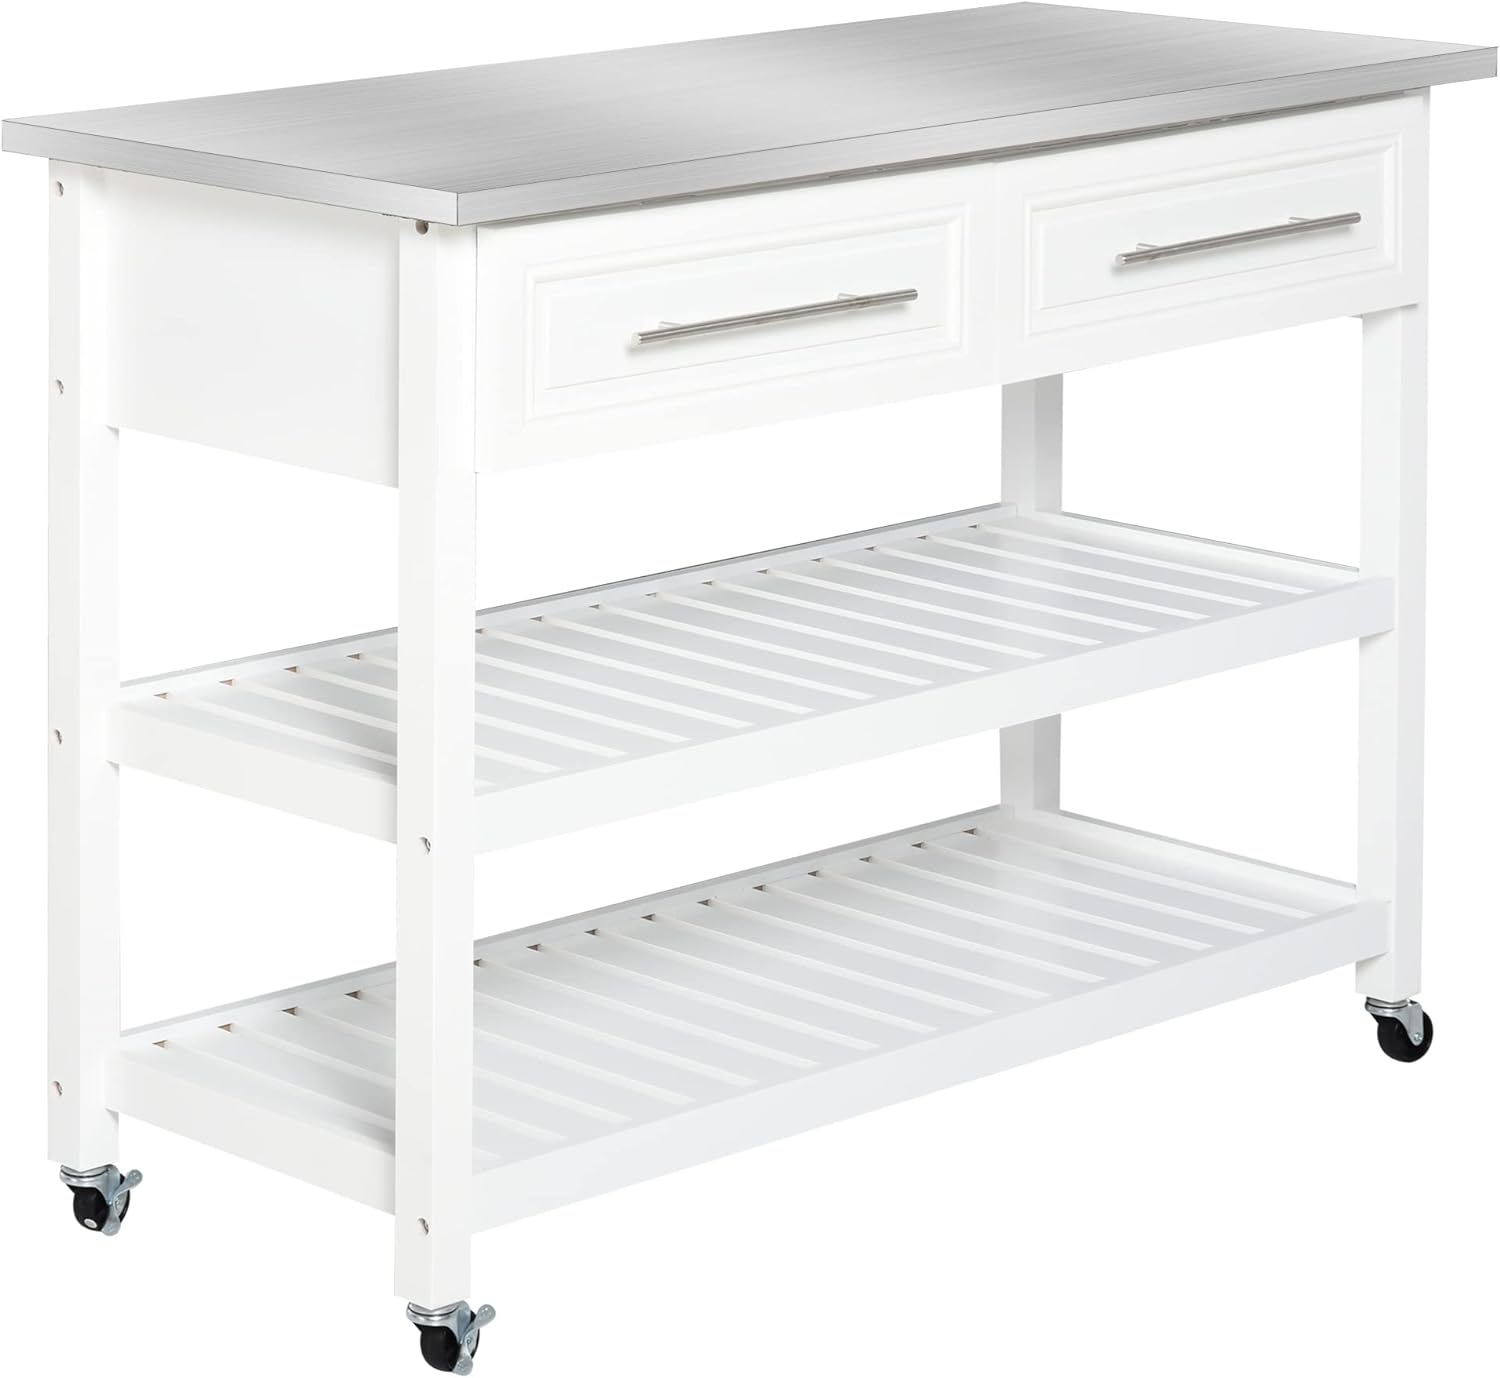 HOMCOM Kitchen Island Rolling Utility Trolley Cart with 2 Drawers Stainless Steel Top - White